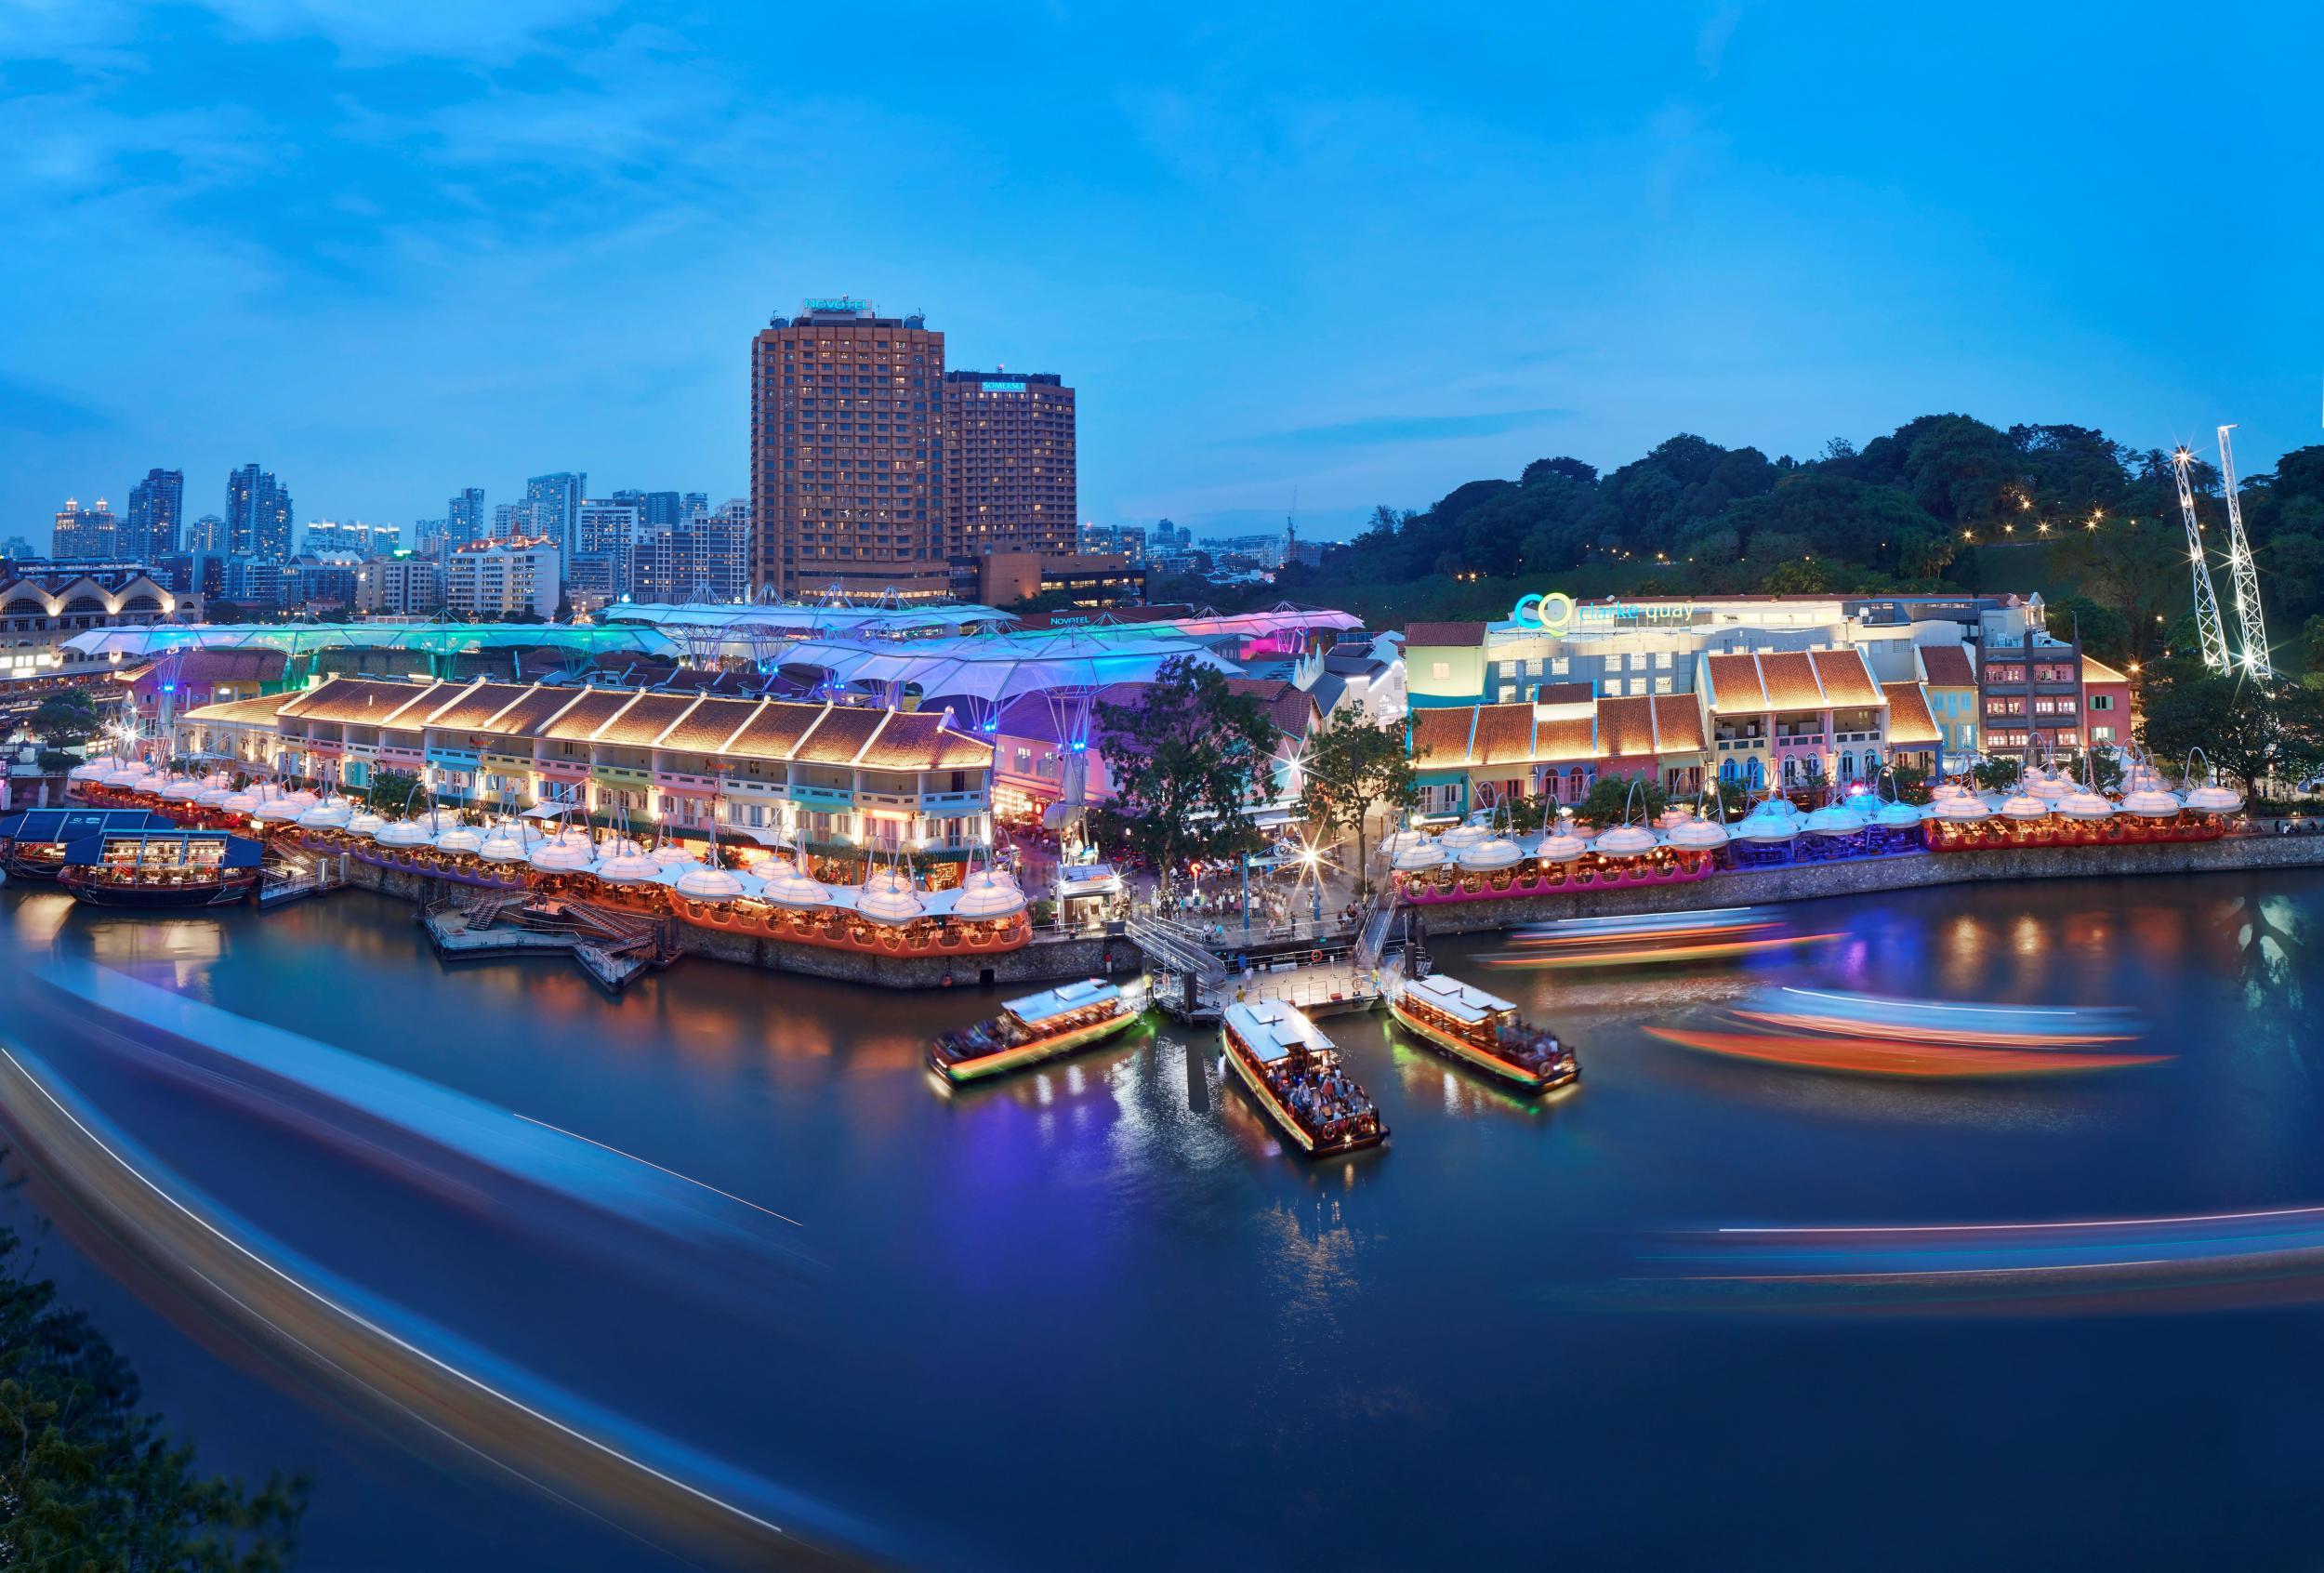 Clarke Quay is now full of noisy bars, restaurants and other entertainment spots